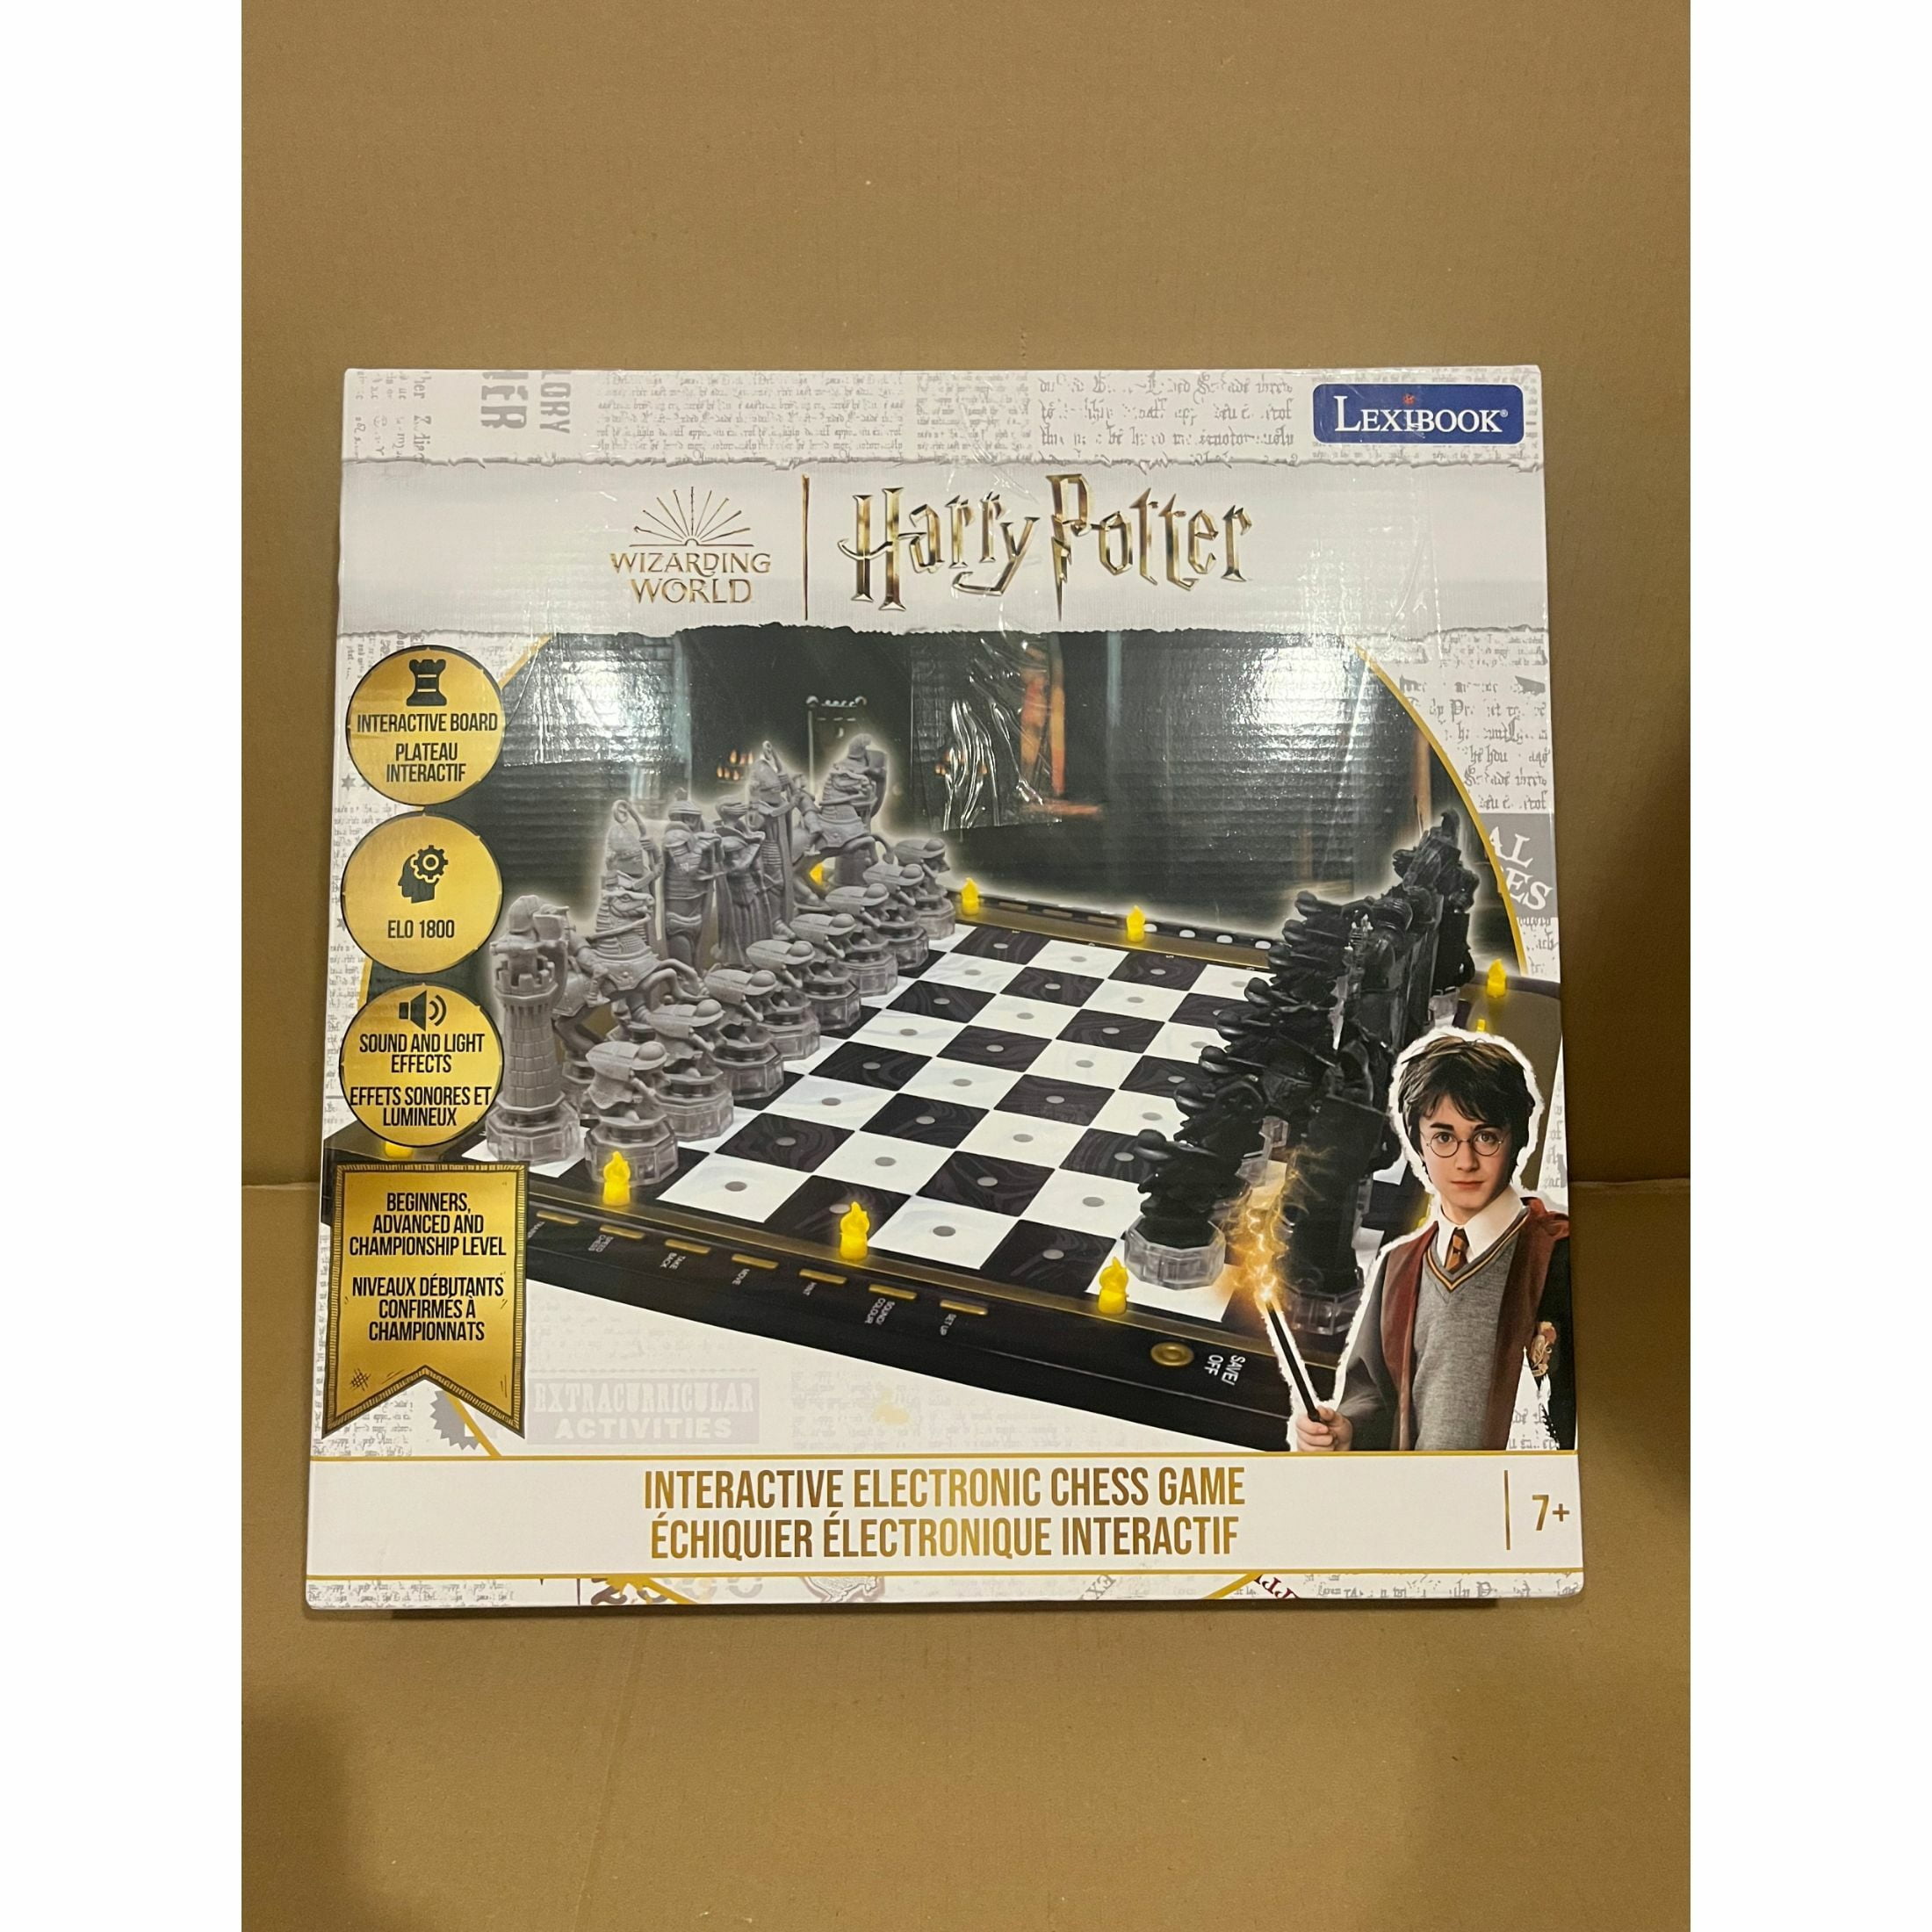 Lexibook Harry Potter Electronic Chess Game with Tactile Keyboard, Plastic  - Black